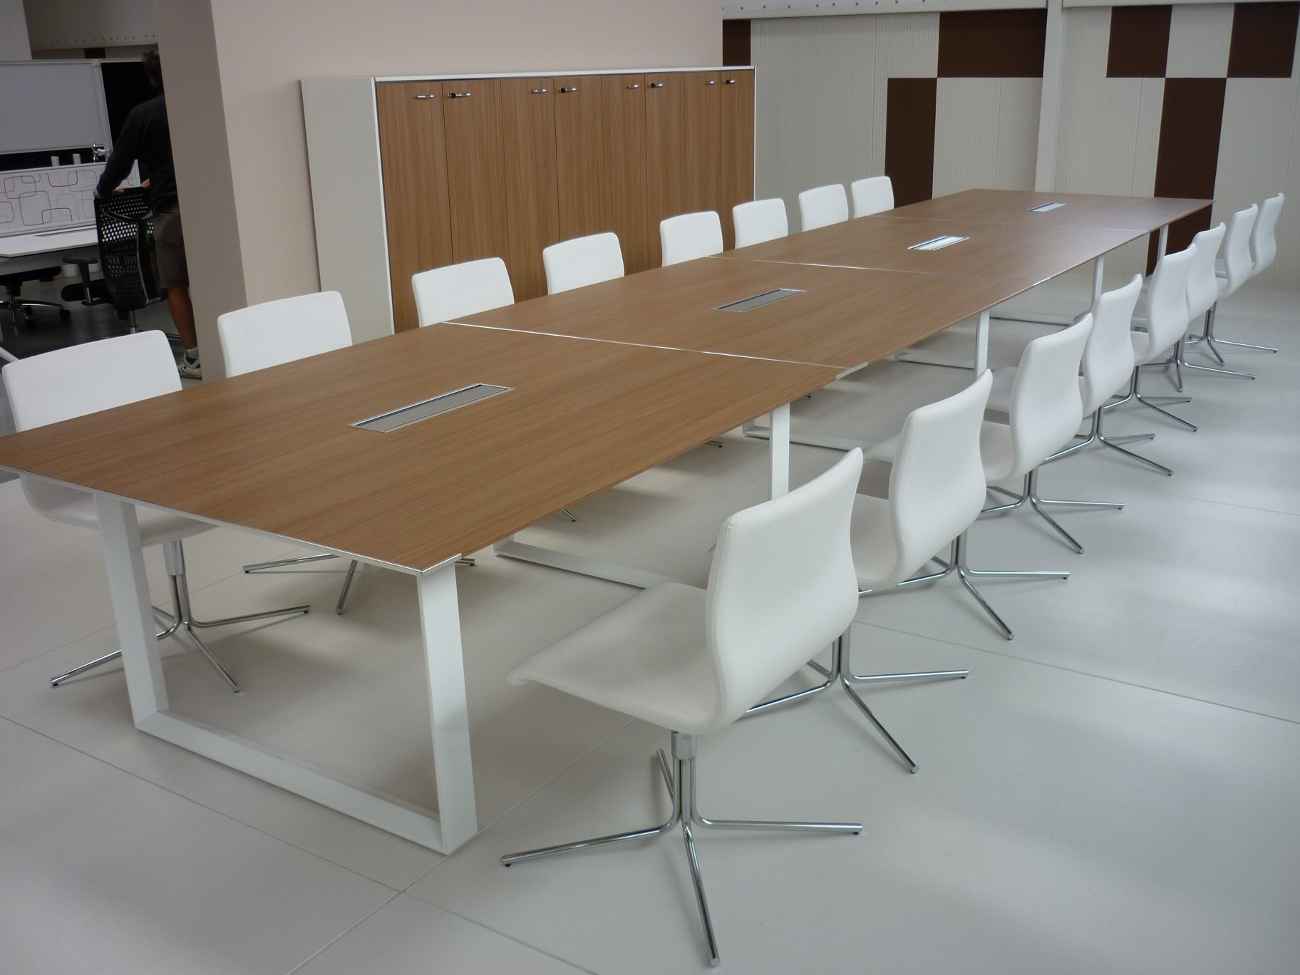 Lease Office Furniture Tips for Business  Office Furniture